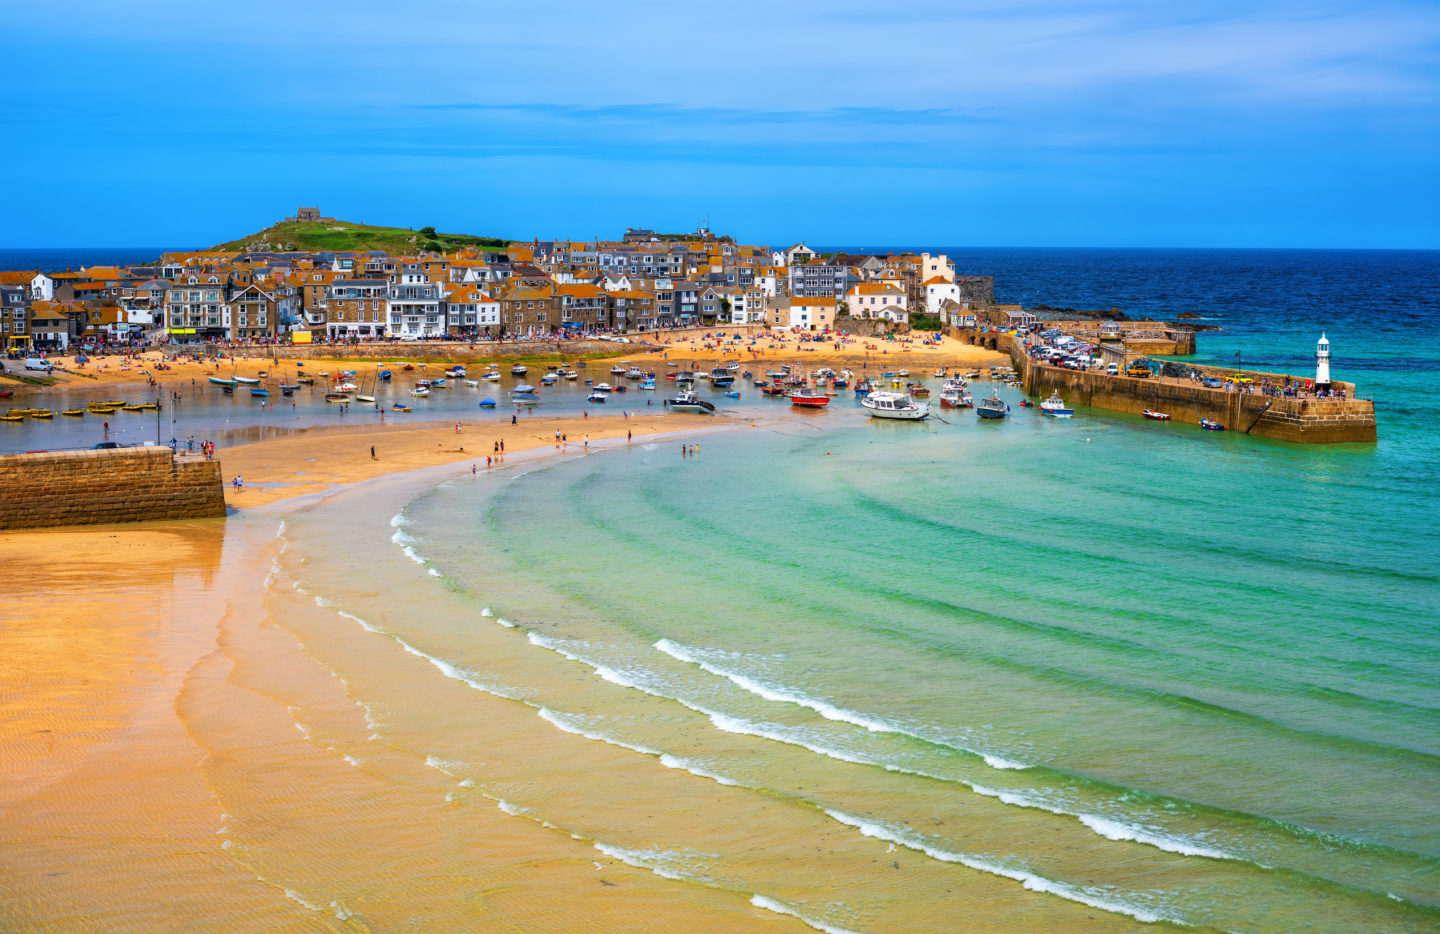 most beautiful places in cornwall - St Ives